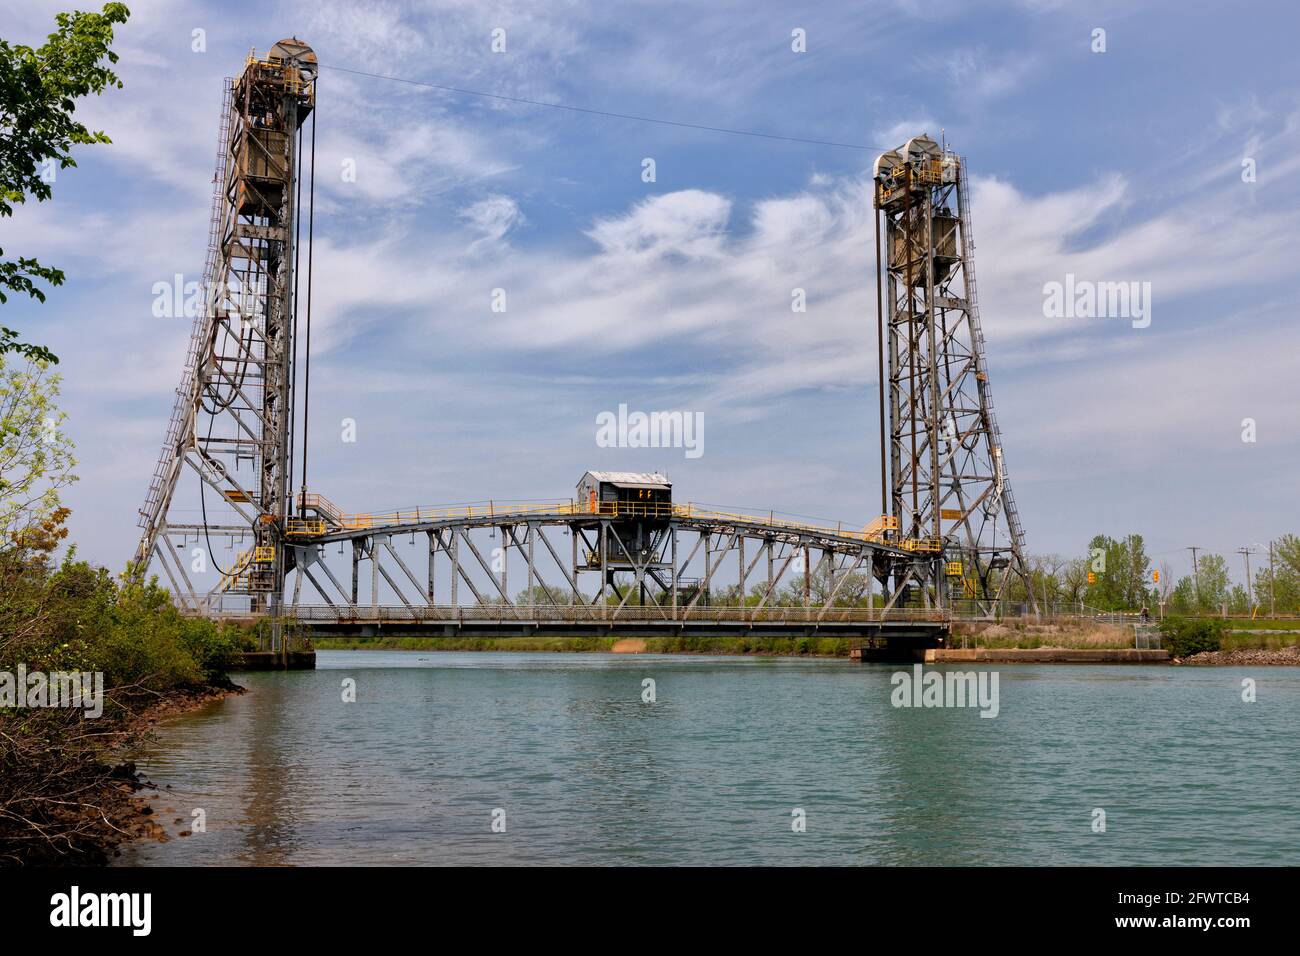 Bridge 5, also known as the Glendale Bridge, a vertical lift bridge the Welland Canal in St. Catharines, Ontario Canada. Stock Photo